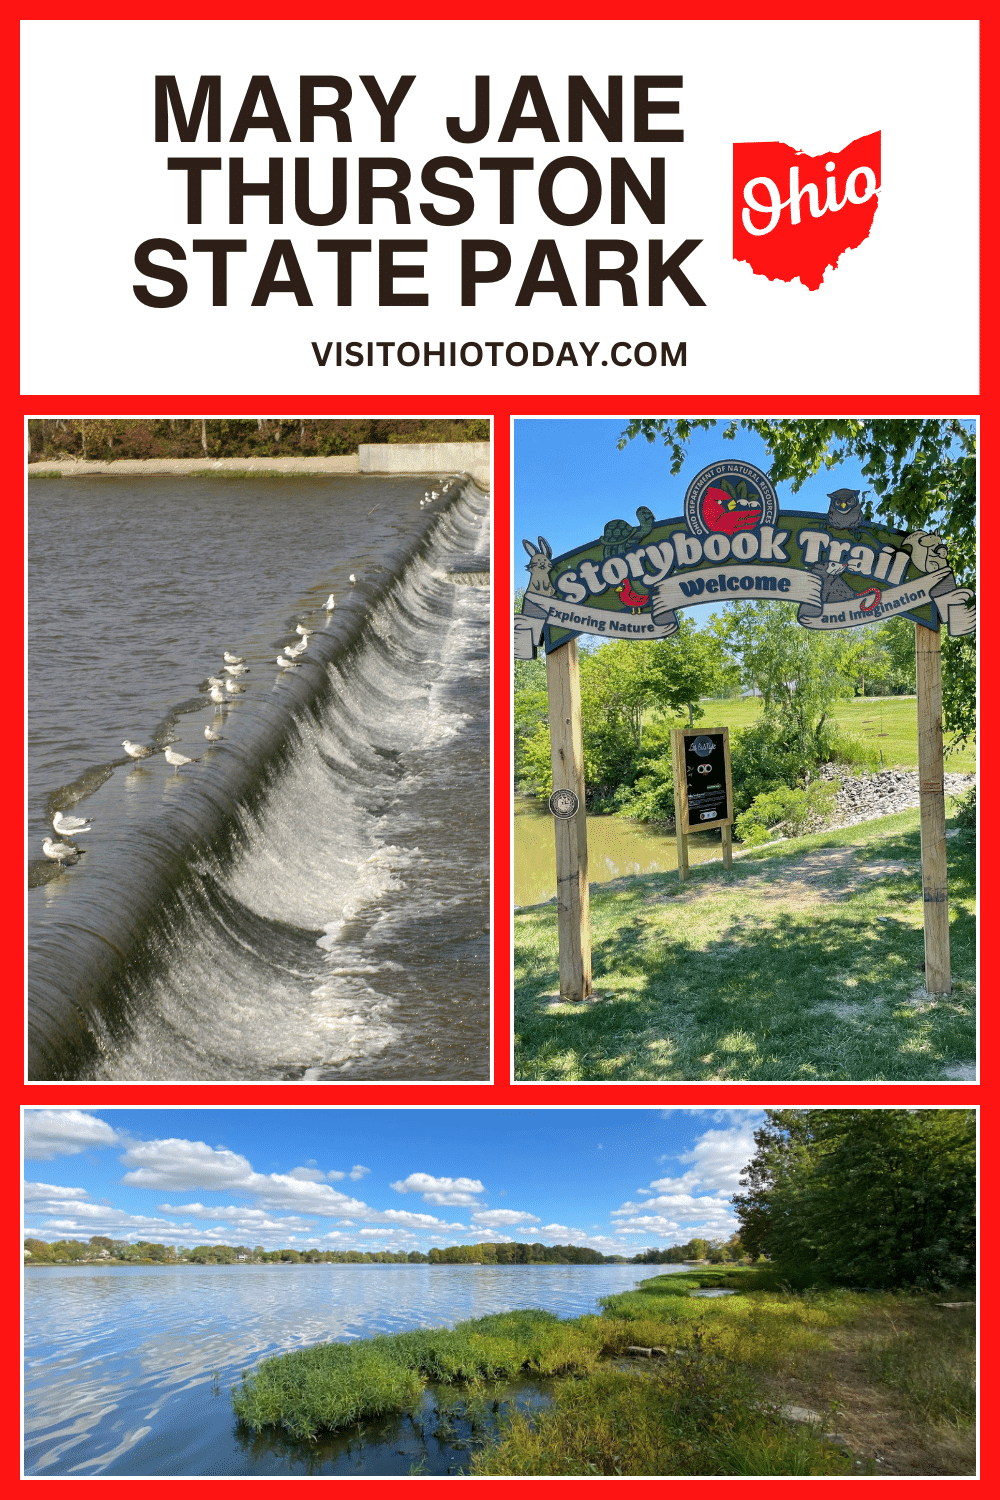 Mary Jane Thurston State Park is a small park covering 105 acres. Situated along the Maumee State Scenic River, there are many activities to enjoy in this park.